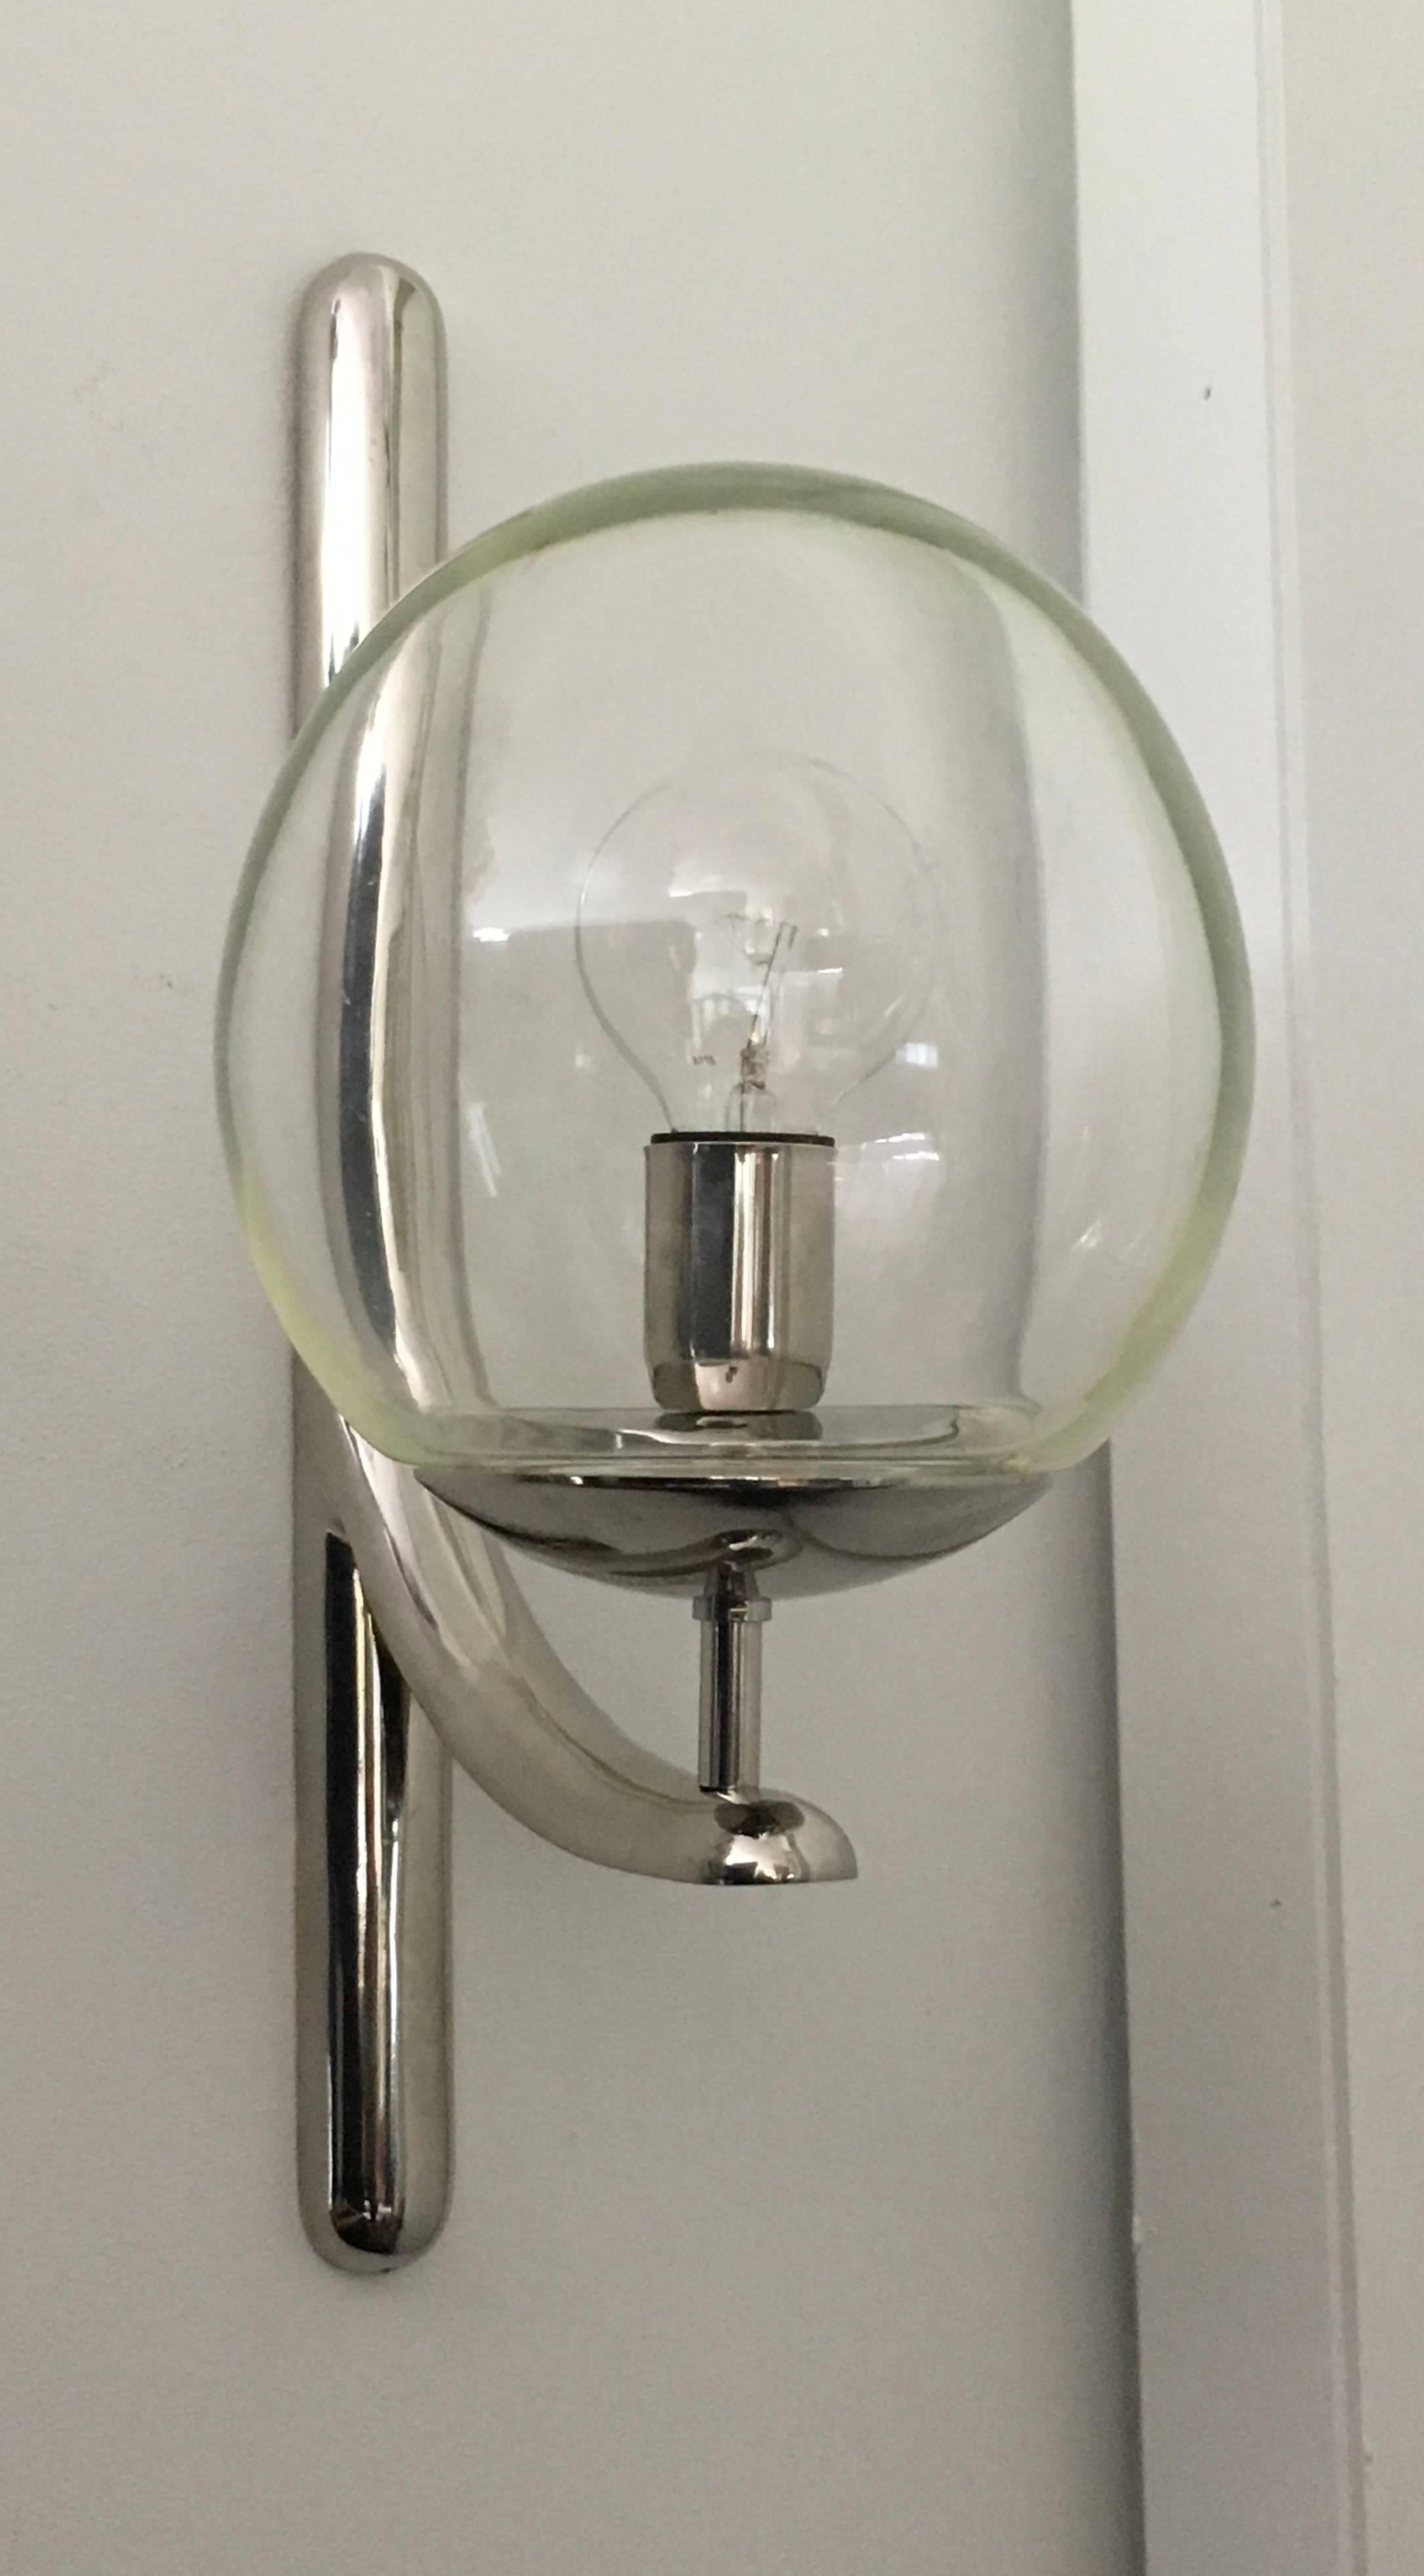 Large-scale chromed cast brass wall lights with handblown glass ball shades; signed Venini Italia 85. 
These are available in two finishes: the original chrome and also in brass. Priced per item.

Avantgarden Ltd. cultivates unexpected and